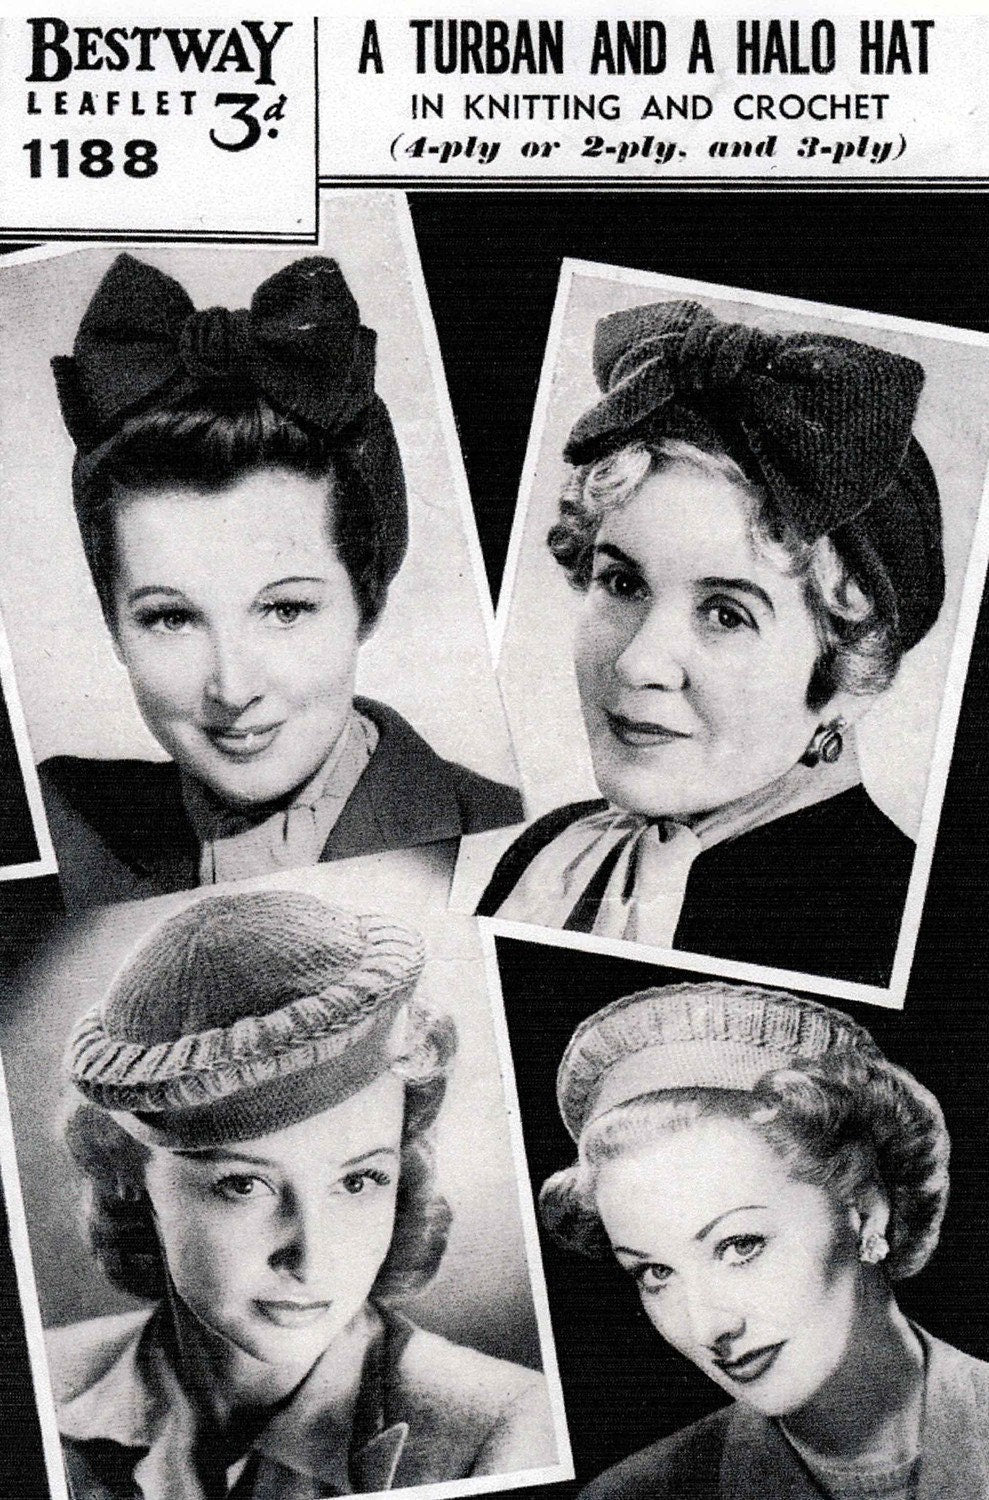 Ladies Turban and a Halo Hat, 40s Knitting Pattern in 4ply and Crochet Pattern in 3ply, Bestway 1188